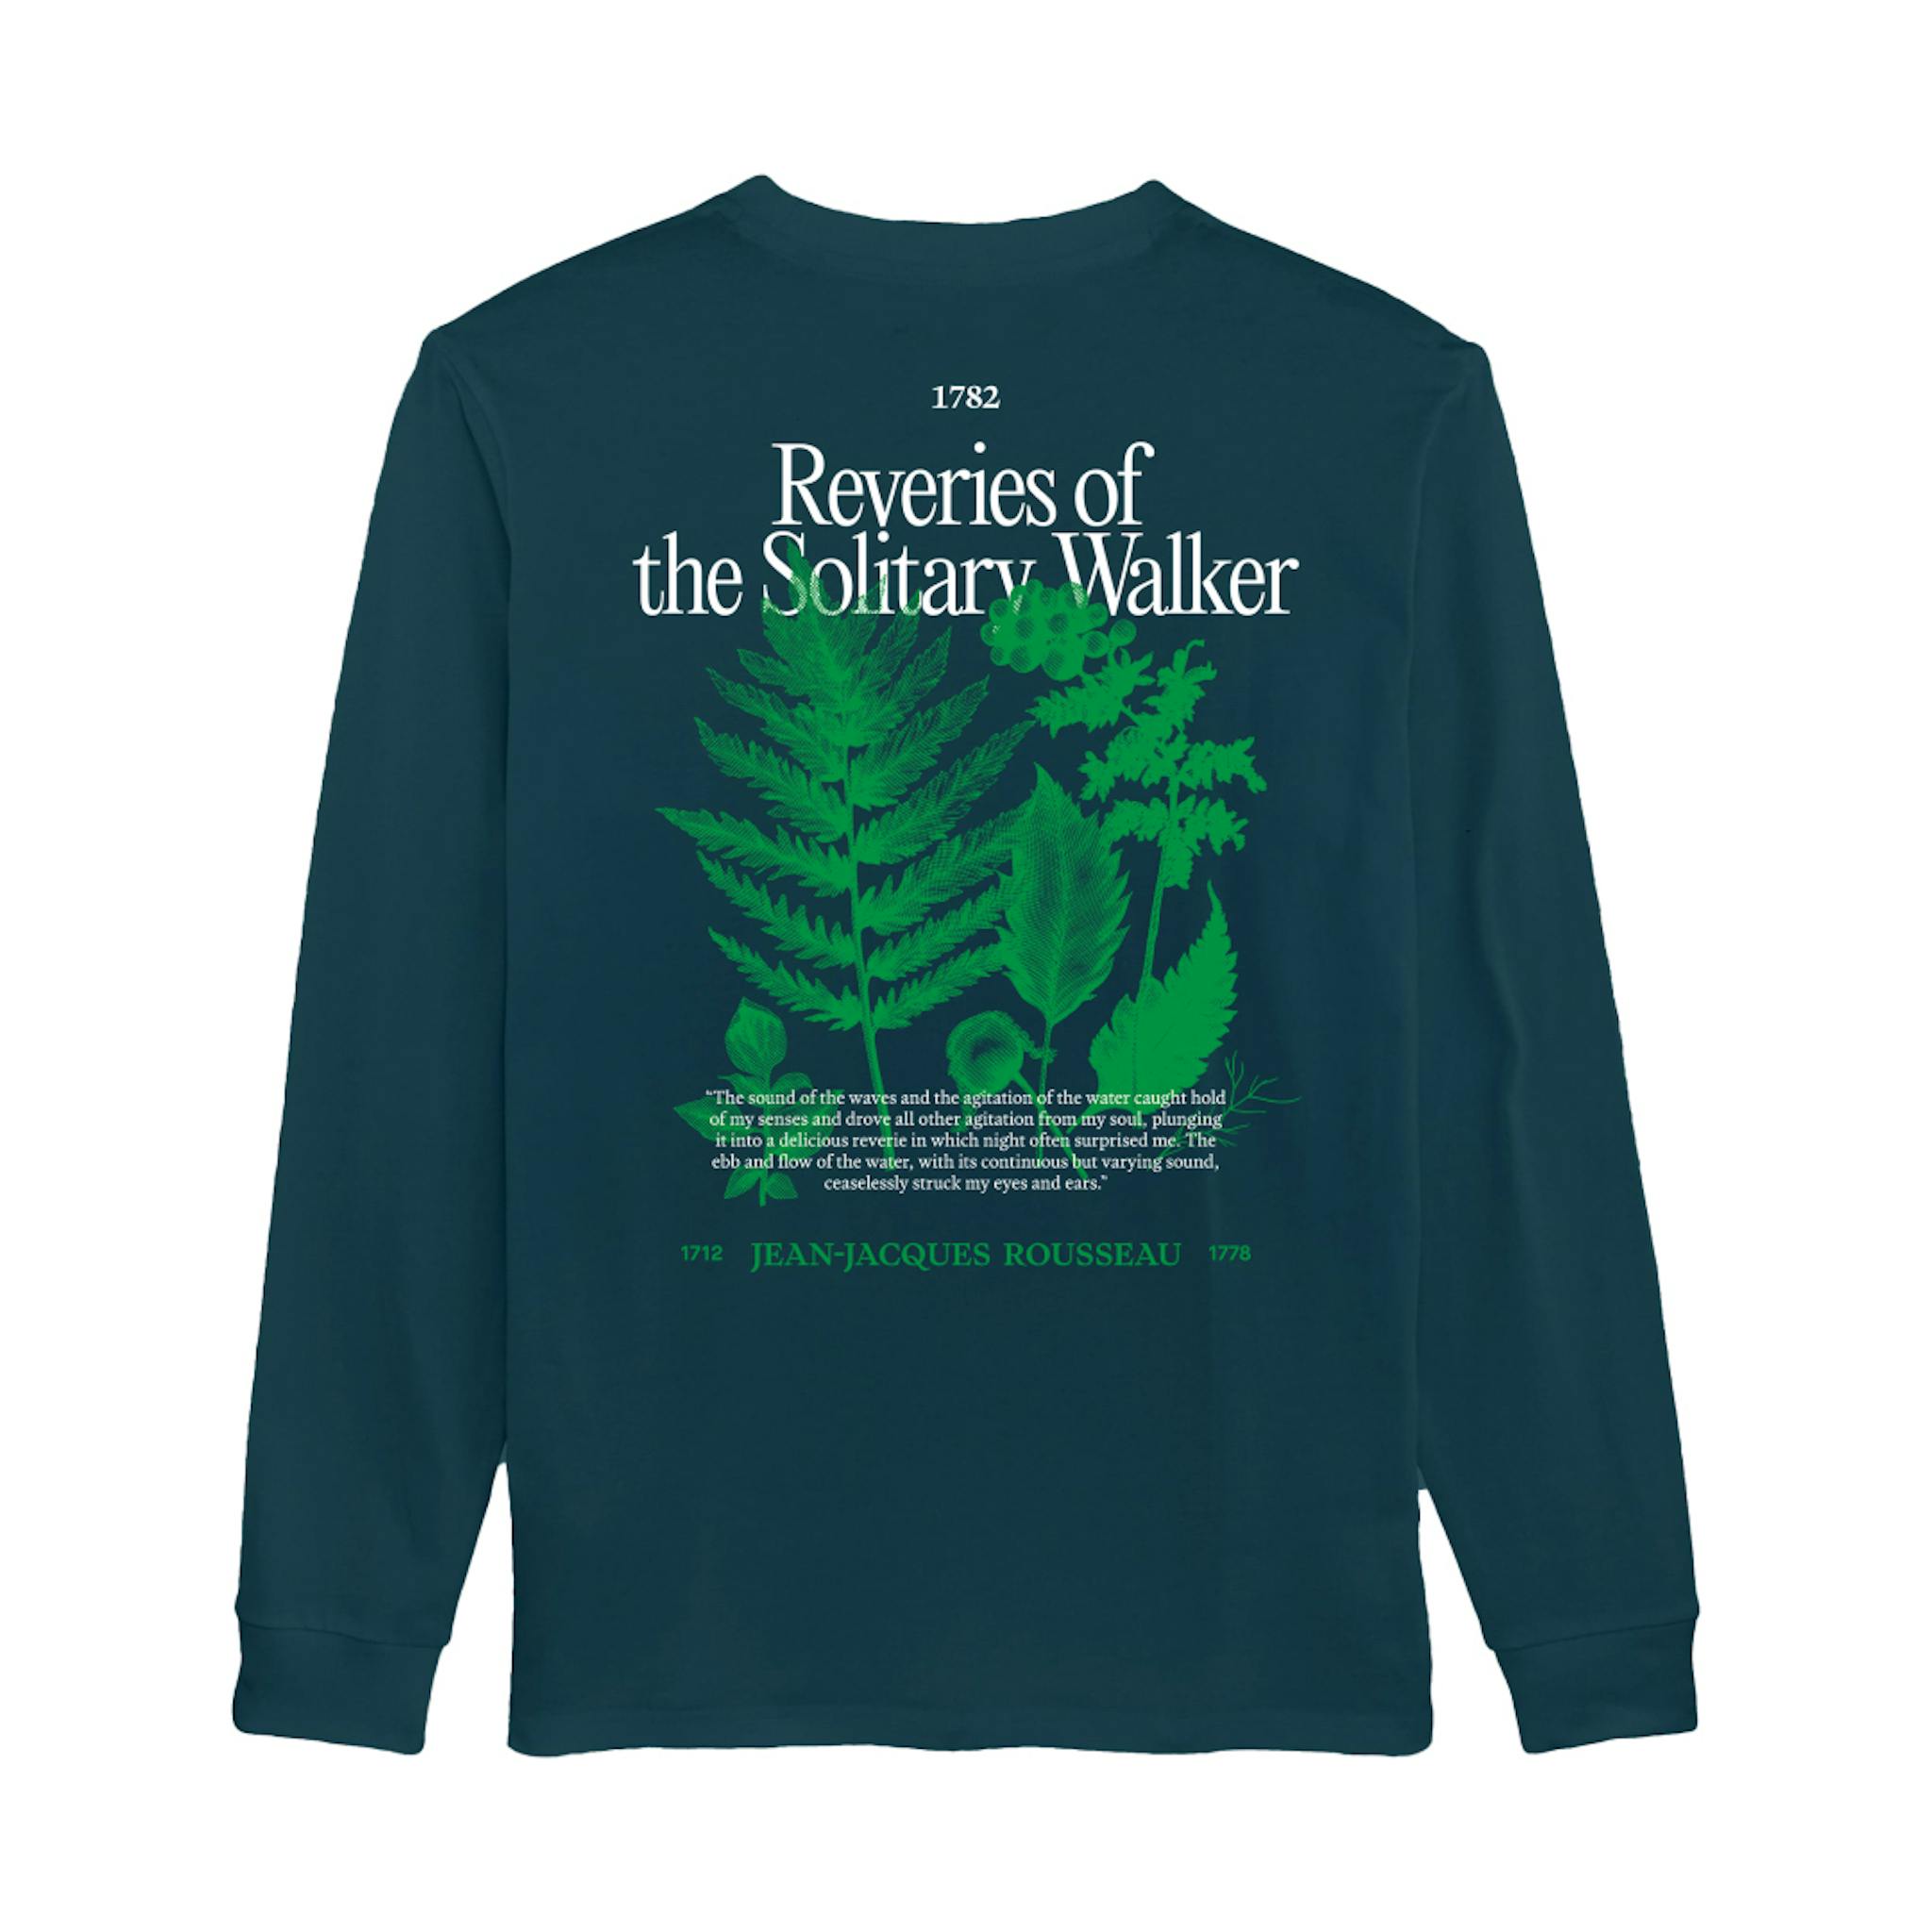 A dark green long-sleeved shirt with green fern graphics and a quote with Jean-Jacques Rousseau's name and publication years below.